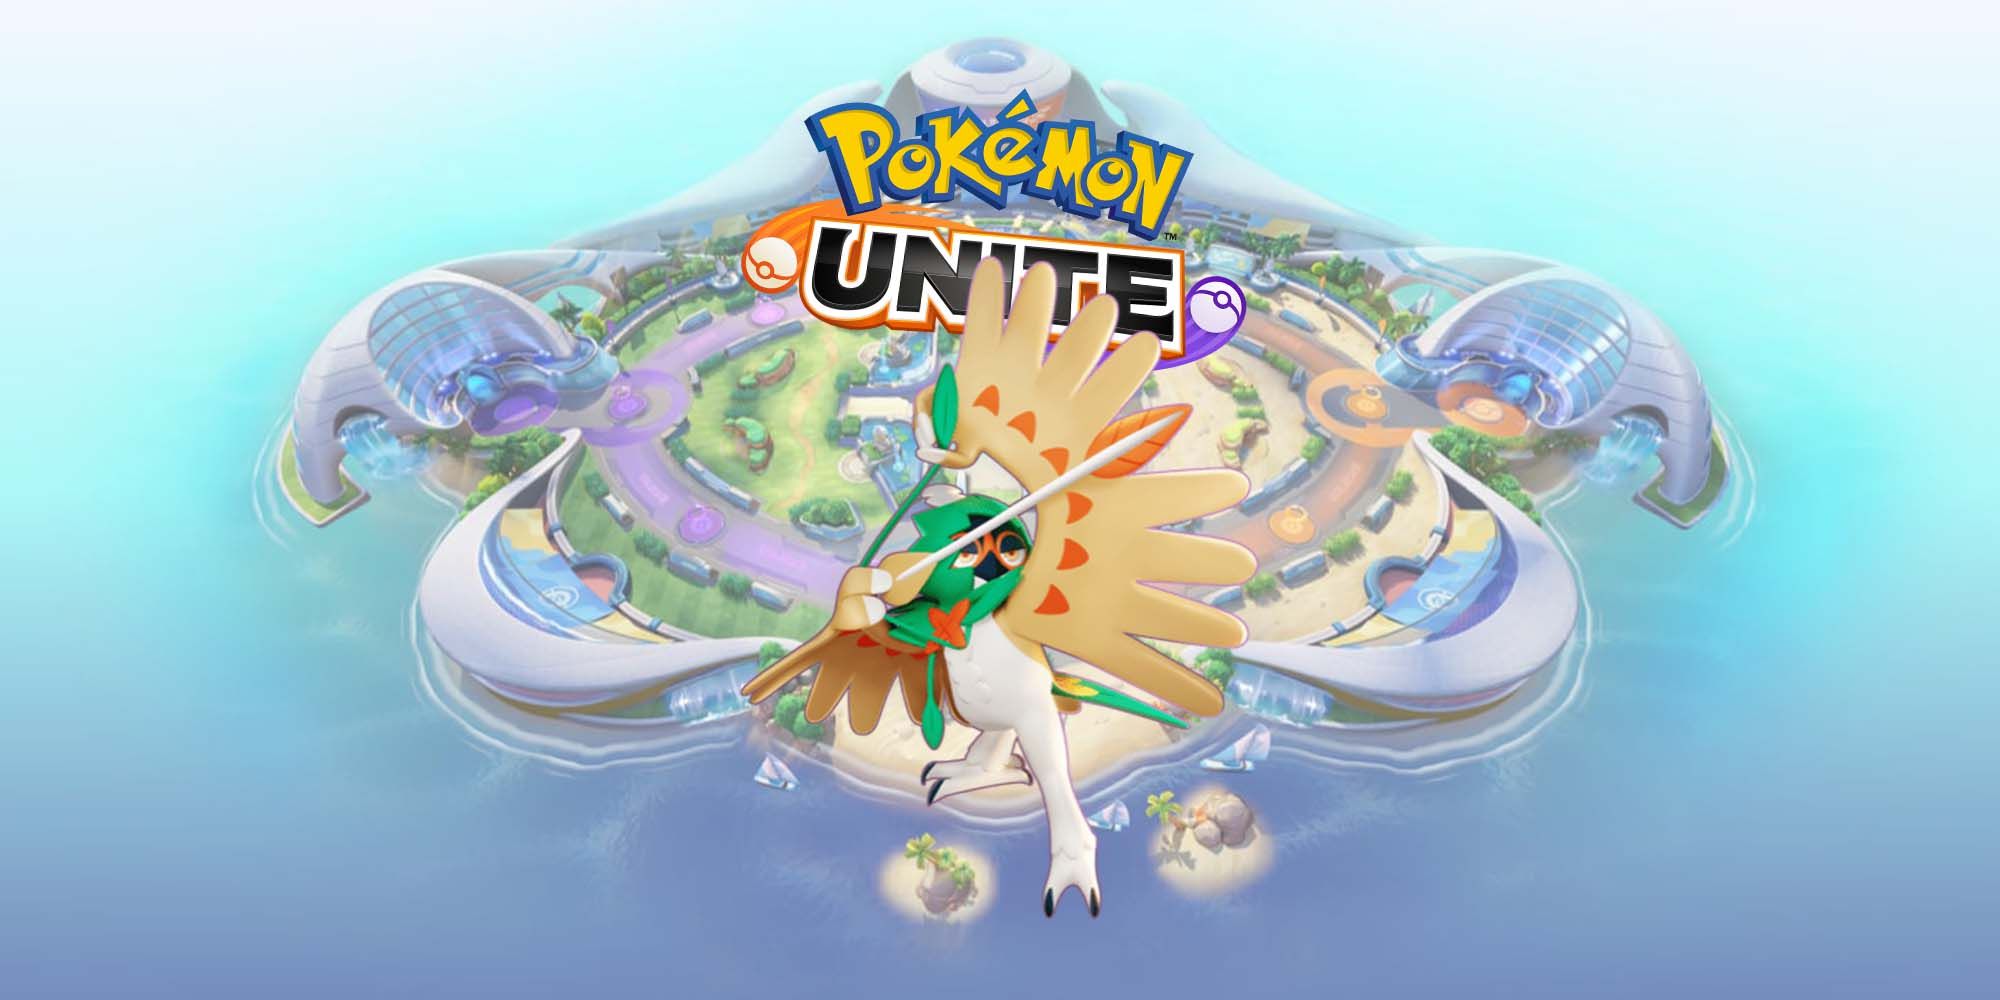 D|ecidueye from Pokemon Unite in front of an image of the island and game logo